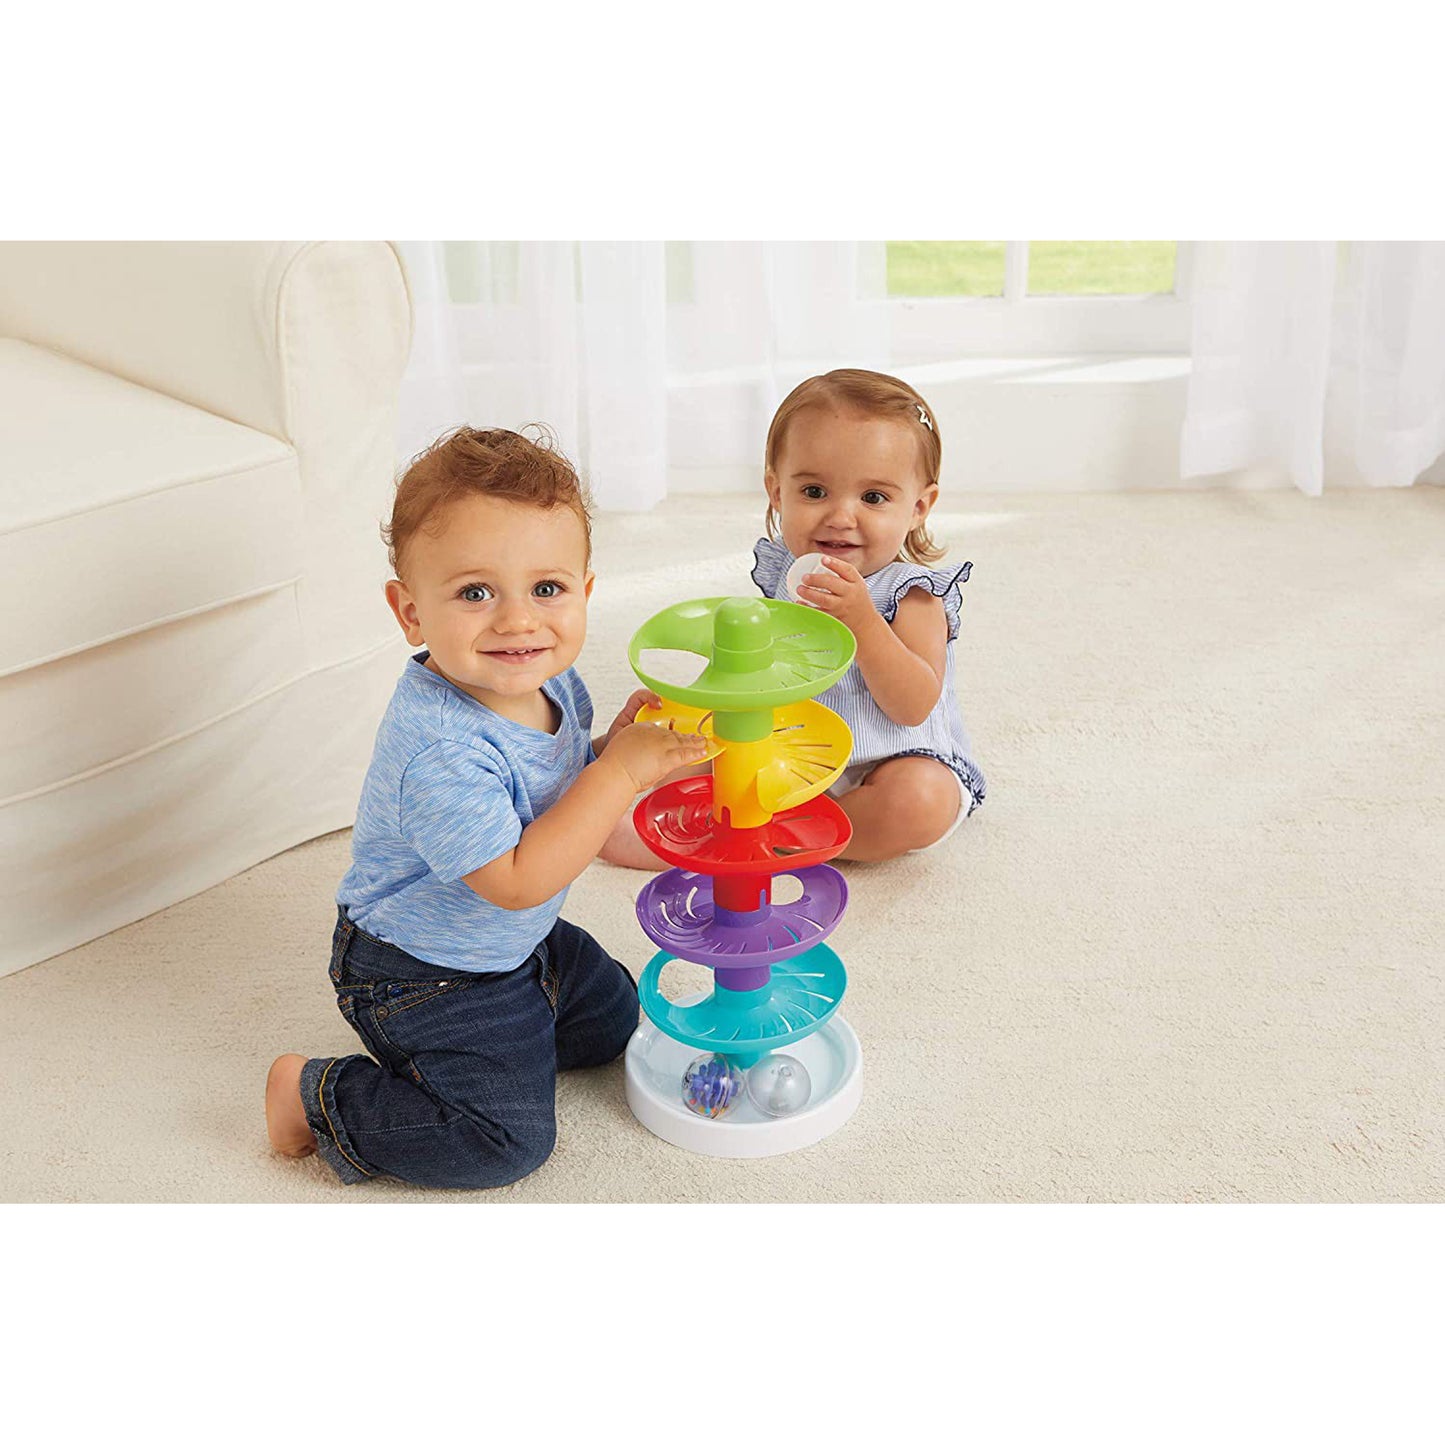 Sparkle and Roll Ball Tower